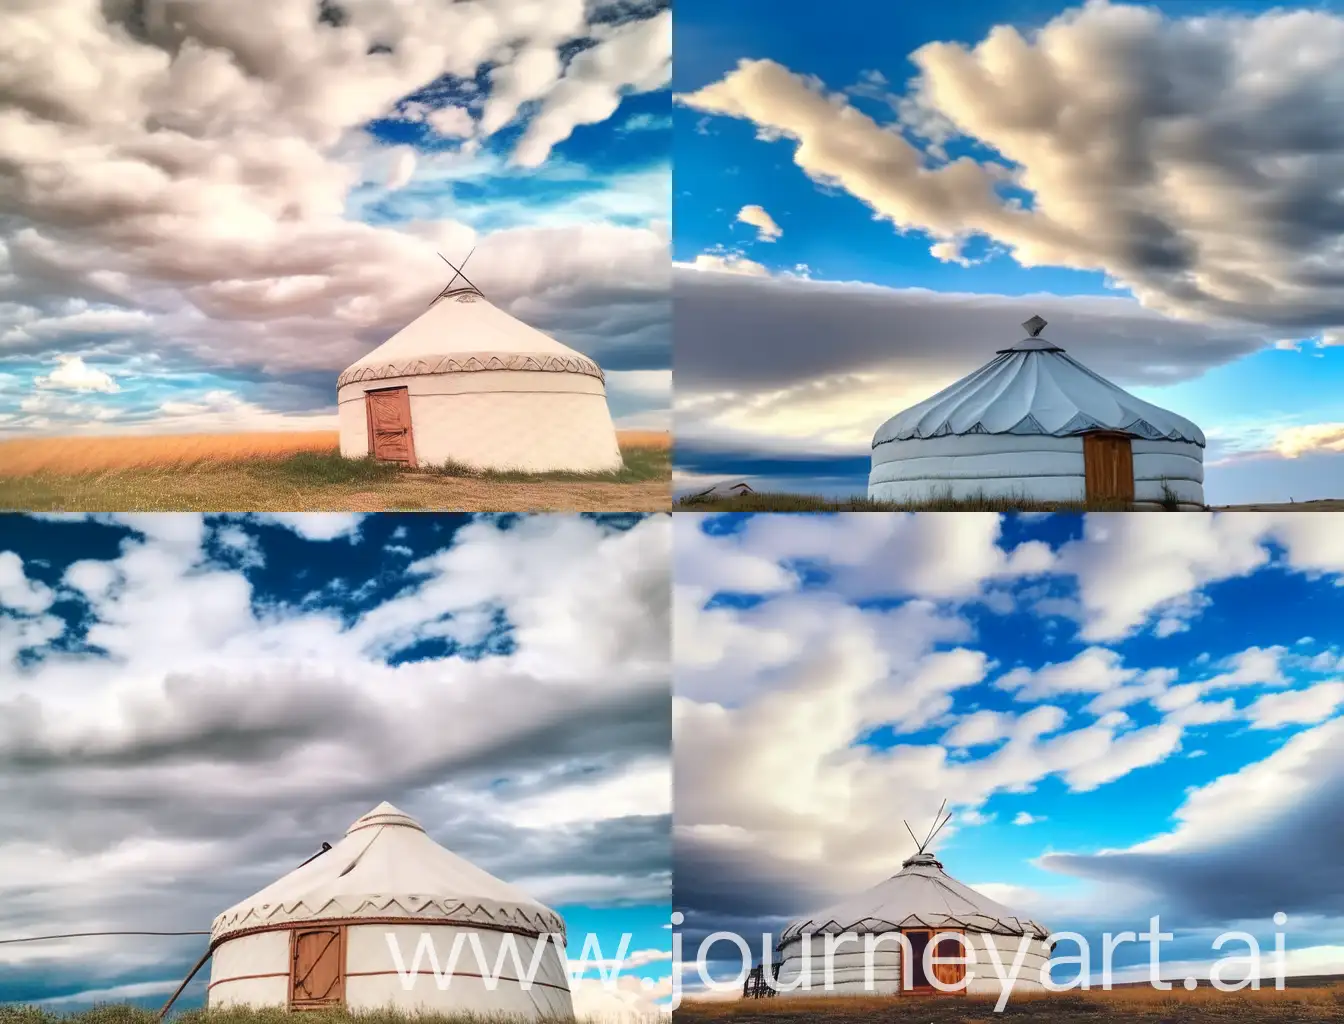 Traditional-Kazakh-Yurt-Amidst-Vast-Steppe-Landscape-with-Spiraling-Clouds